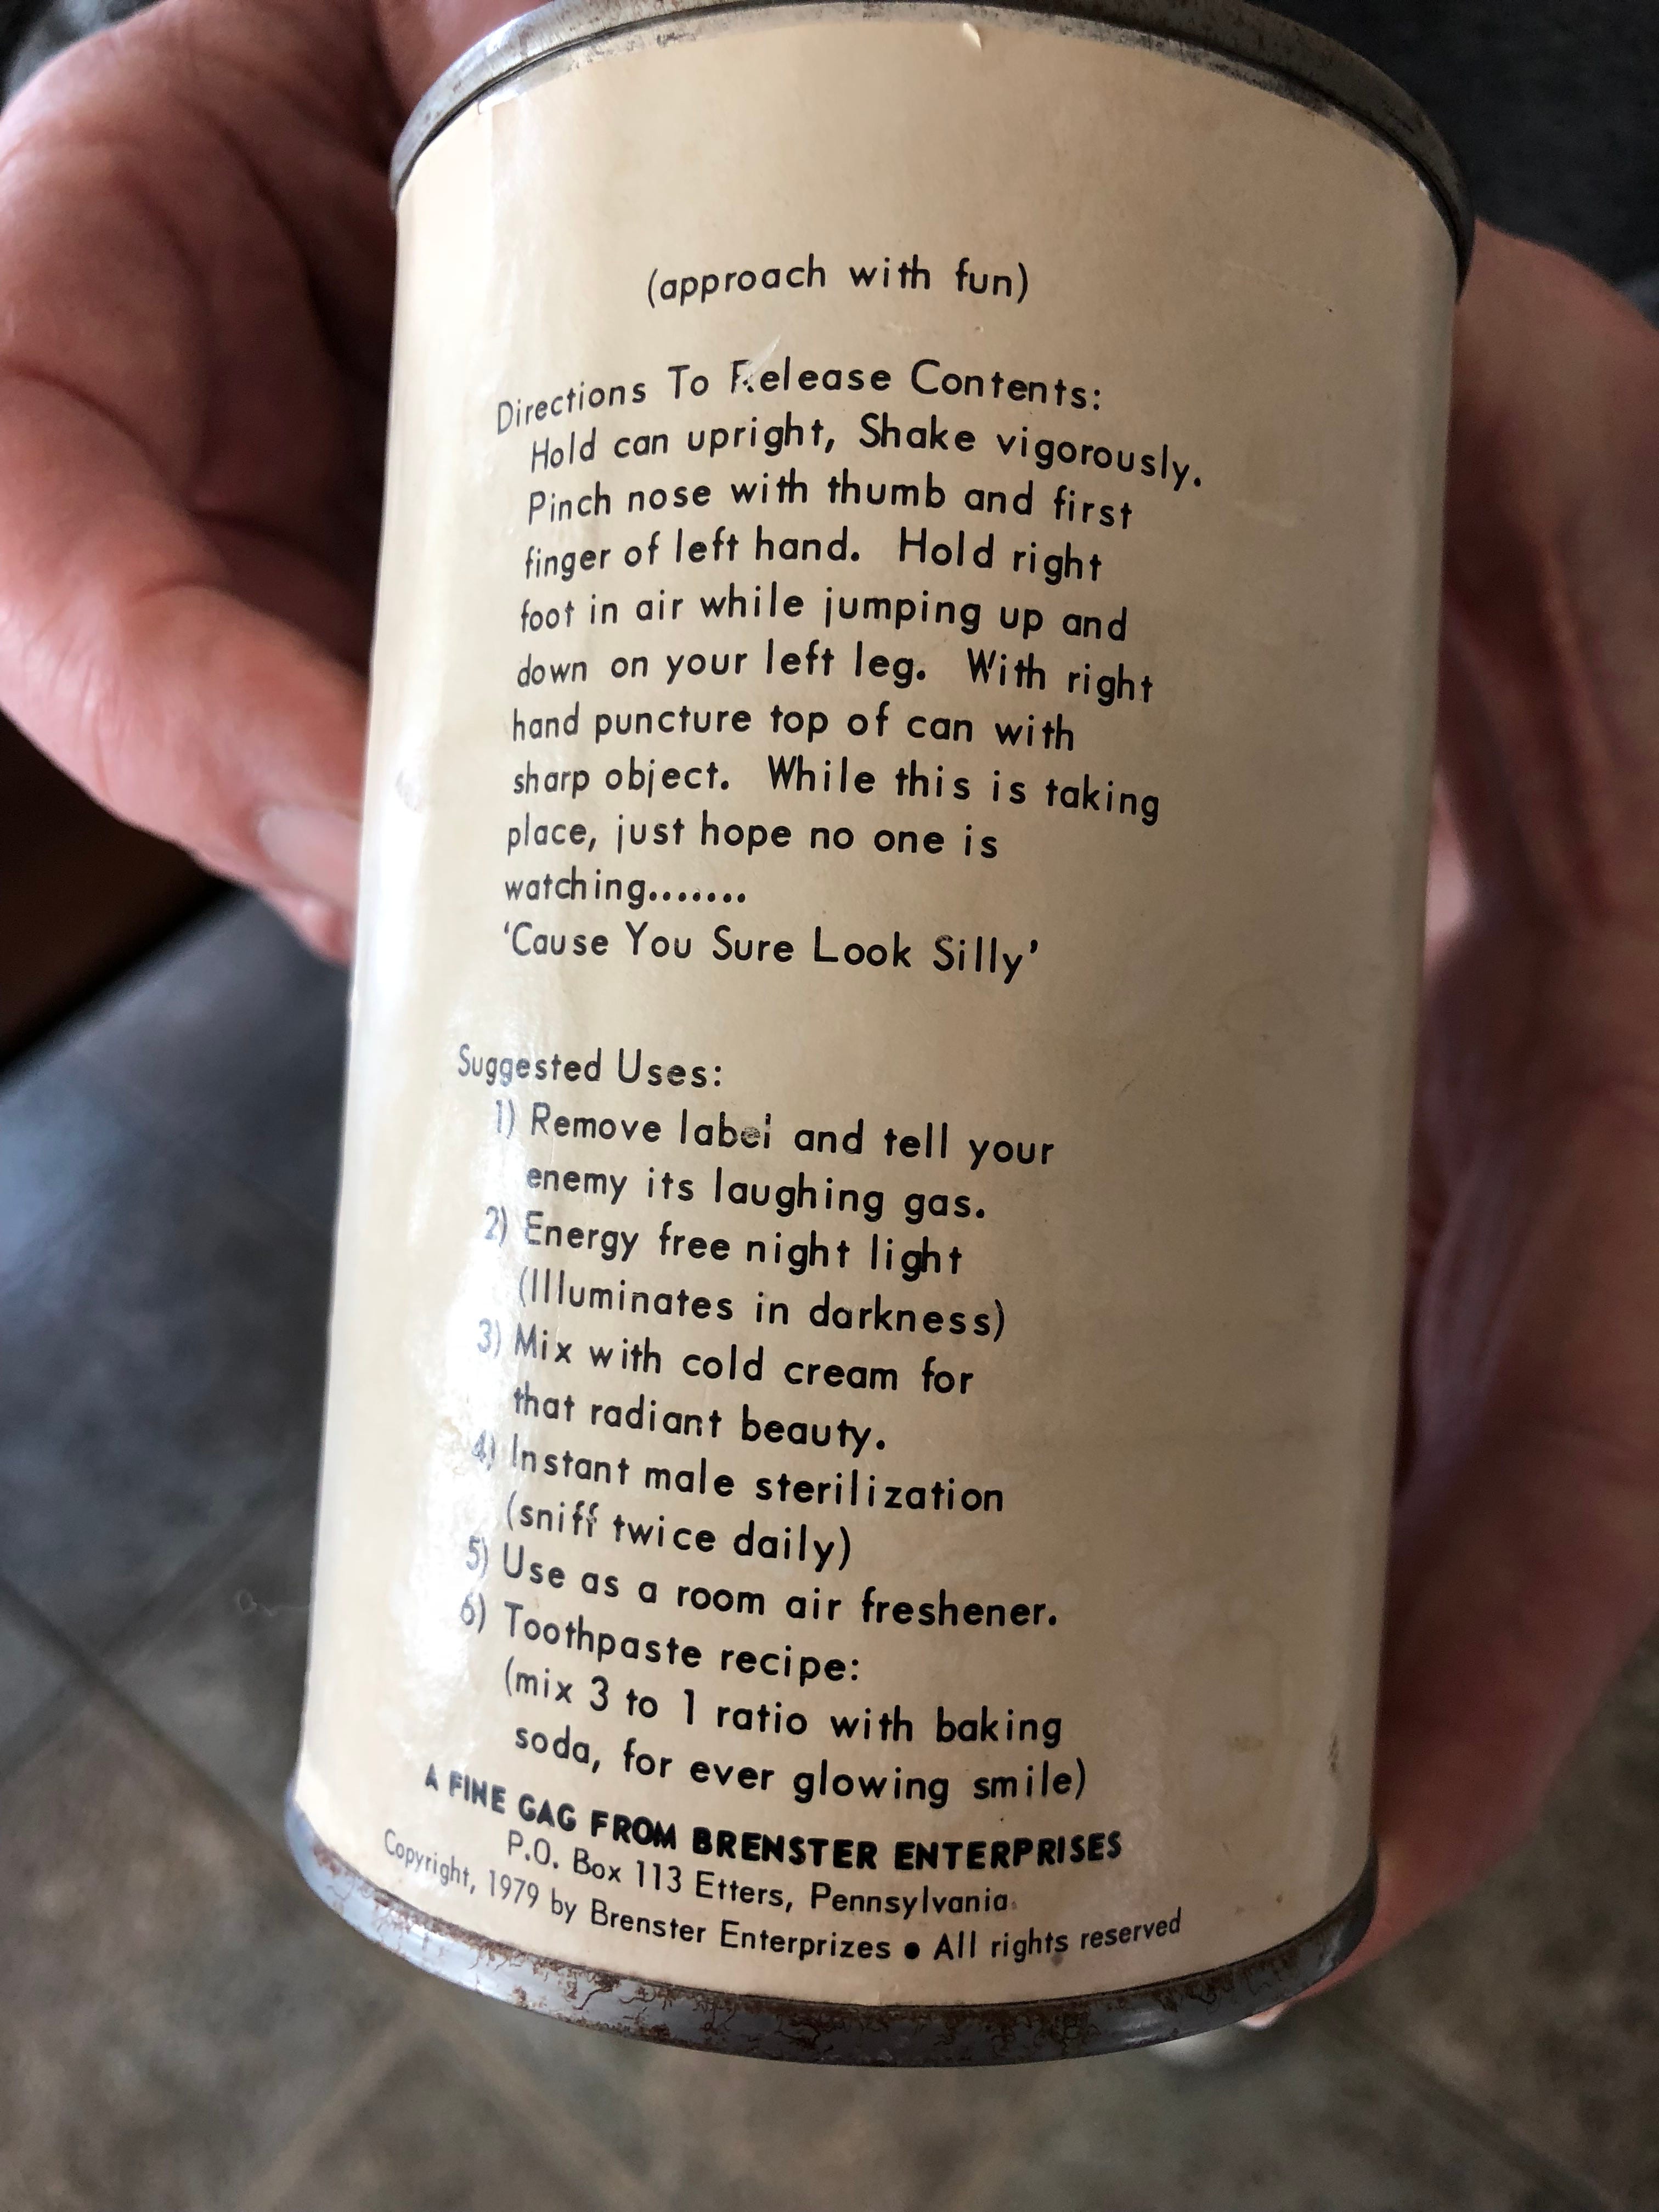 Kevin Molloy, former Dauphin County Civil Defense/Communications Director, was among the first to respond following the 1979 nuclear accident at TMI-2.

He shows an example of a gag gift created following the accident — radioactive air "canned on location at TMI." — Wednesday, March 13, 2019. (Photo by: Lindsay C. VanAsdalan)